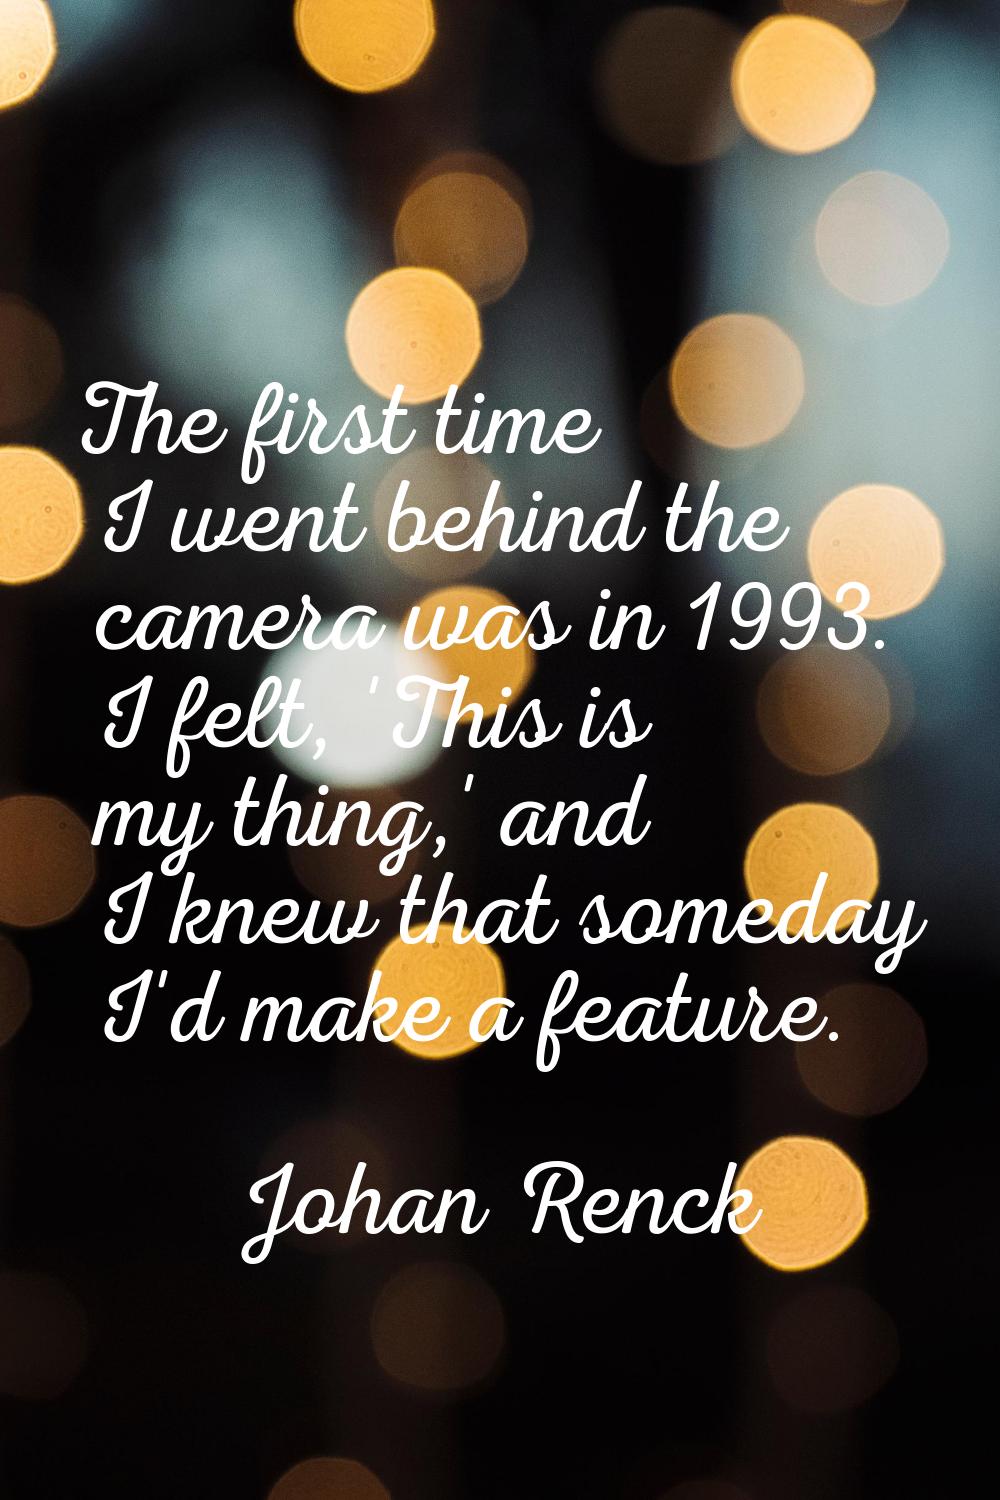 The first time I went behind the camera was in 1993. I felt, 'This is my thing,' and I knew that so